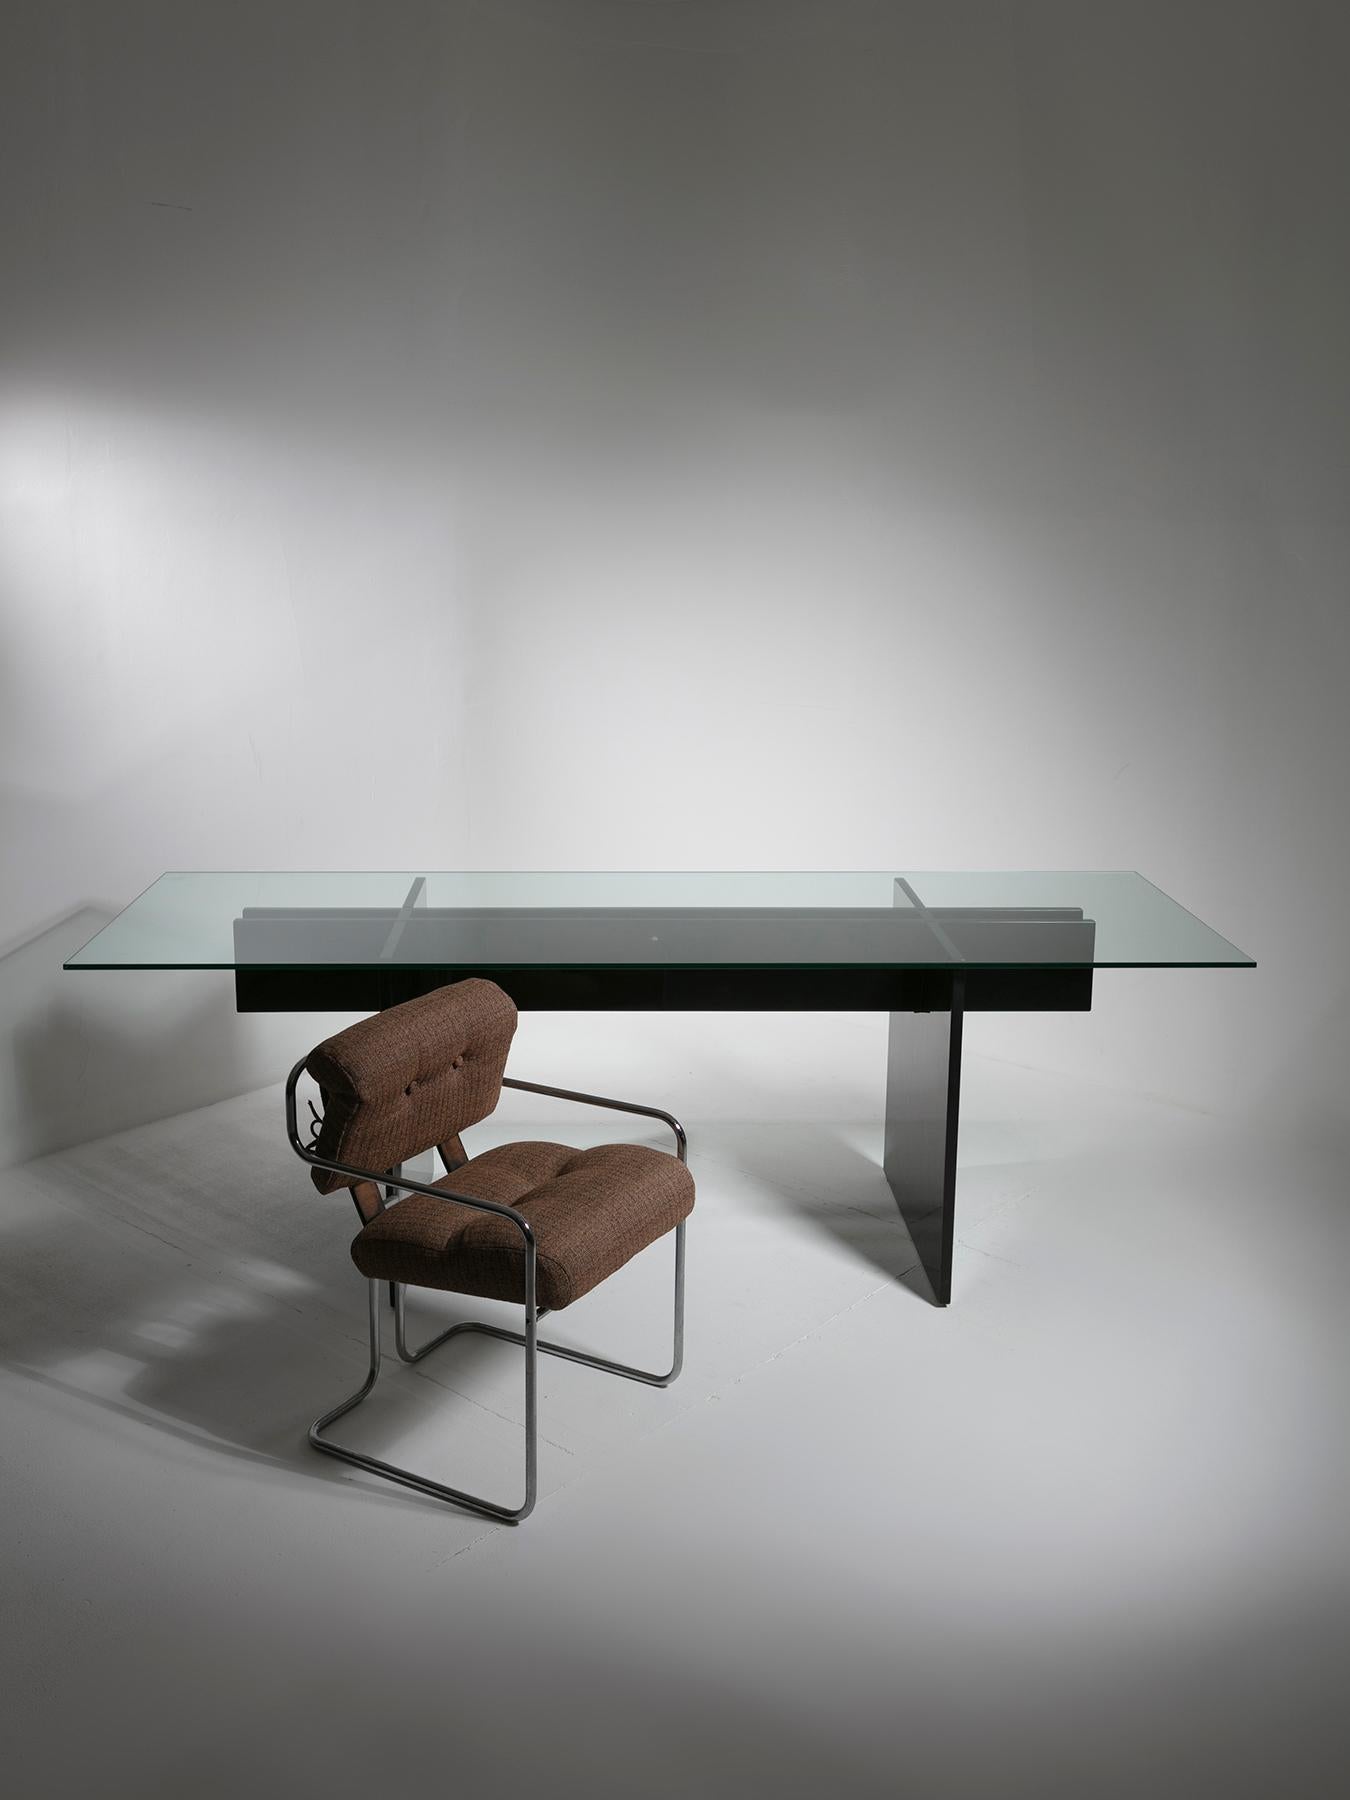 Large Rare Table by Studio Tetrarch for Bazzani, Italy, 1960s For Sale 2